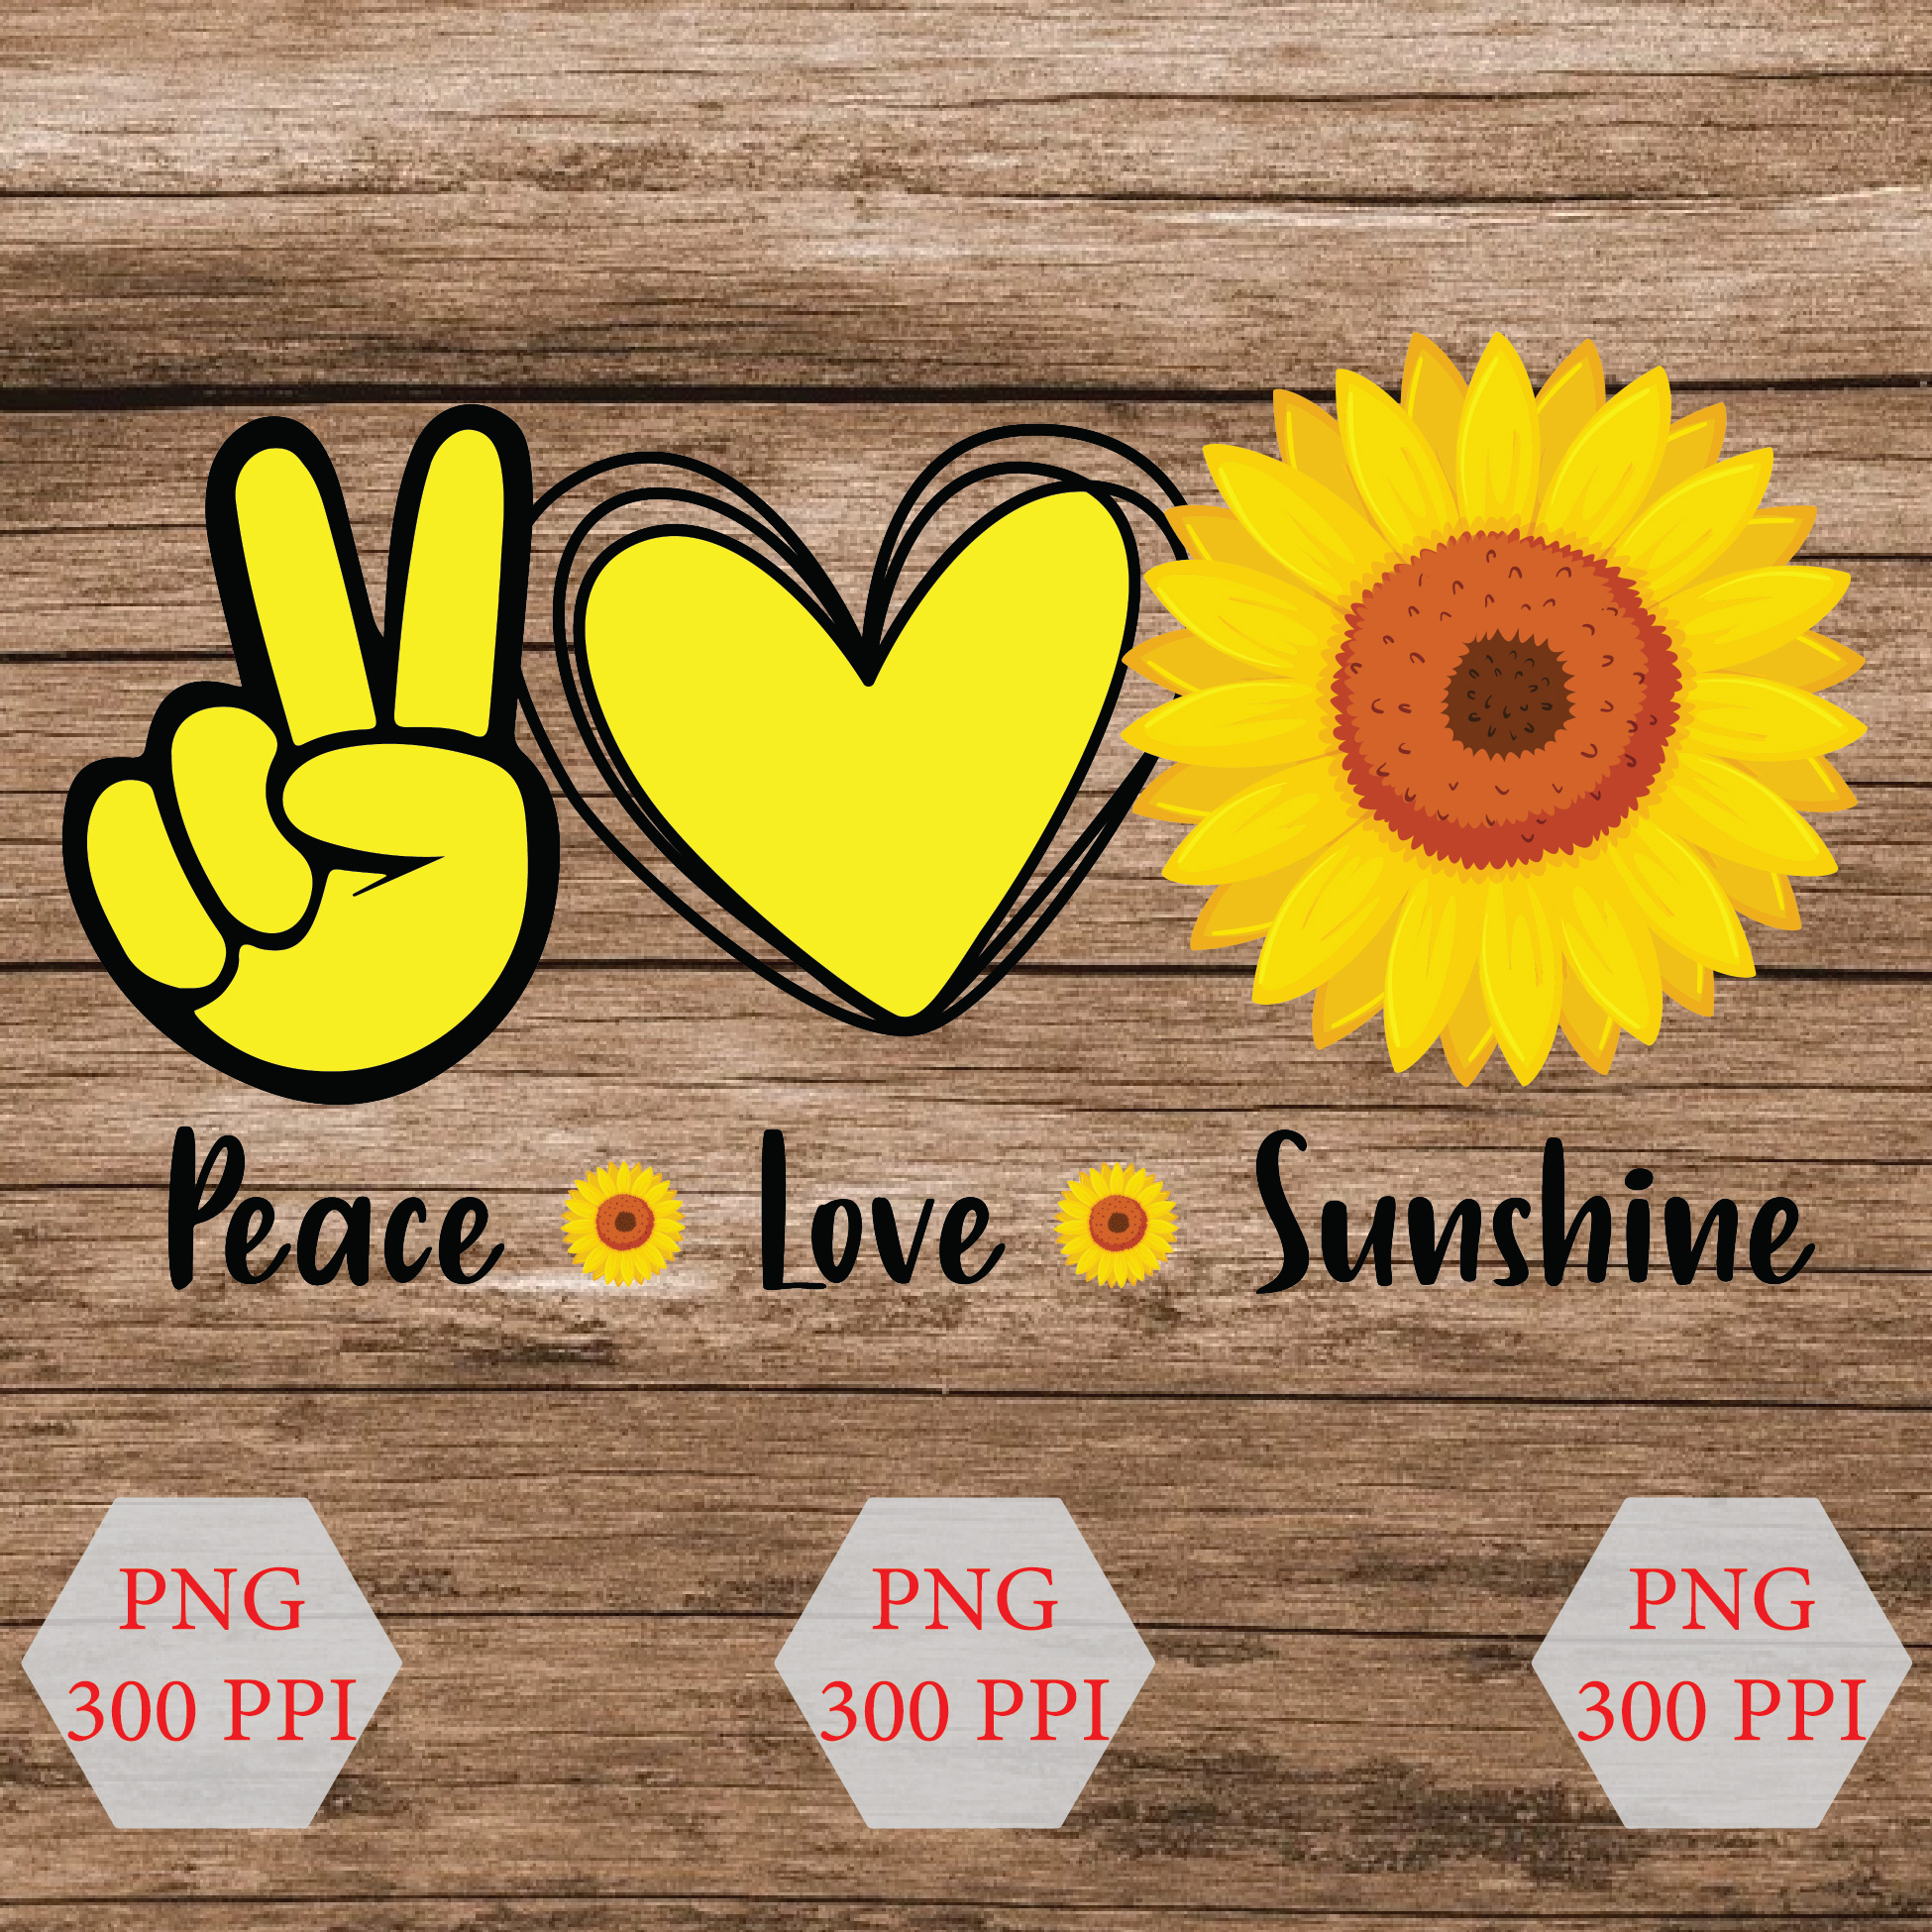 Download Clip Art Art Collectibles Peace Love Svg Svg For Cricut Silhouette Png Jpg Dxf Peace Love Sunshine Svg Hand Drawn Heart Svg Sunflower Svg Hand Peace Sign Svg